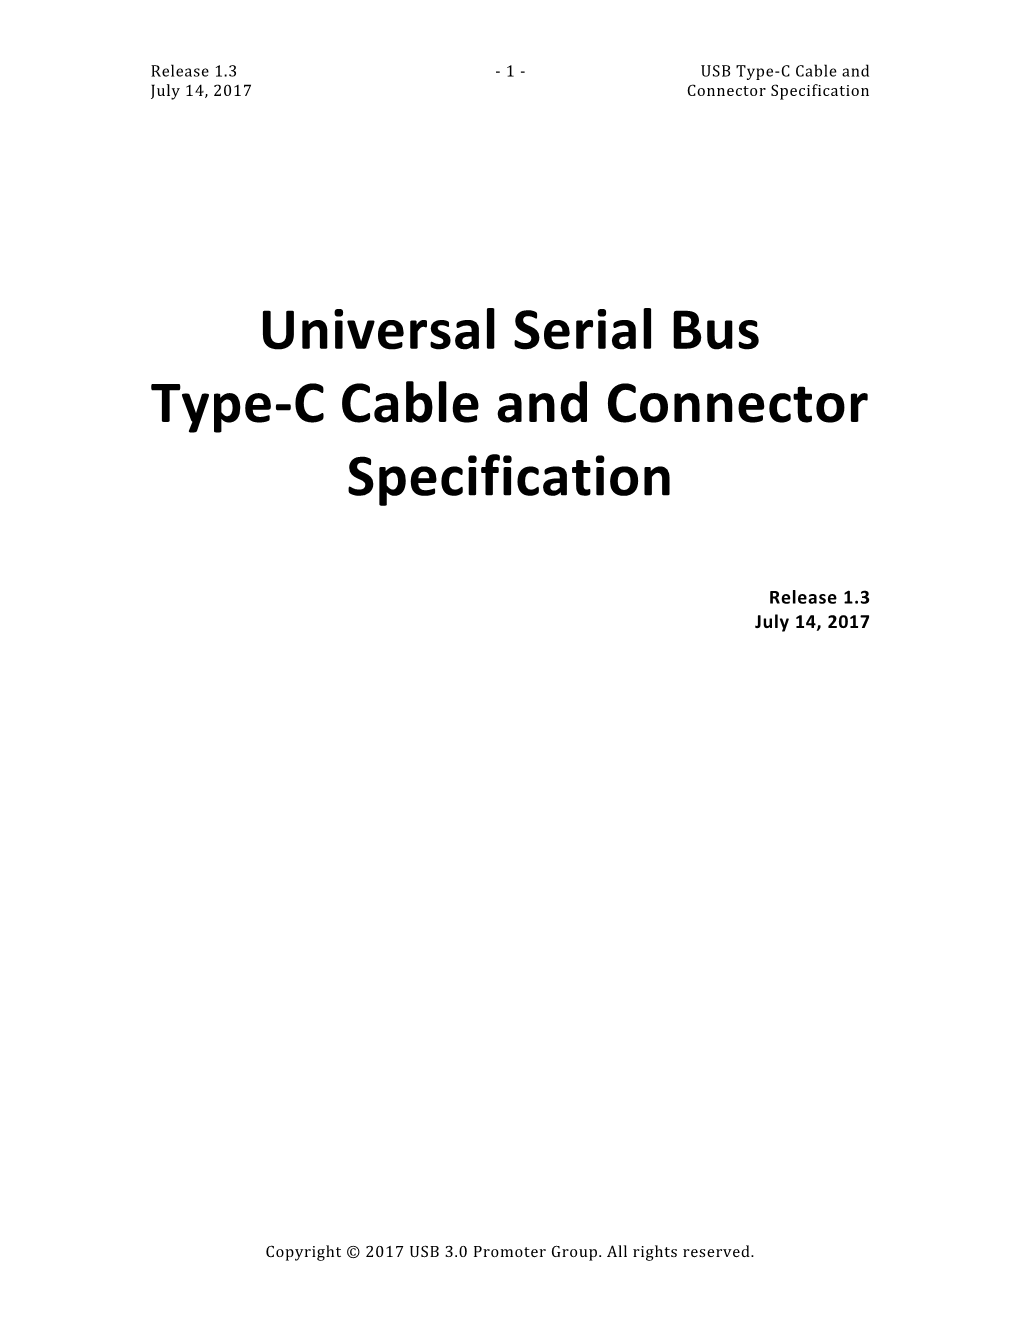 Universal Serial Bus Type-C Cable and Connector Specification